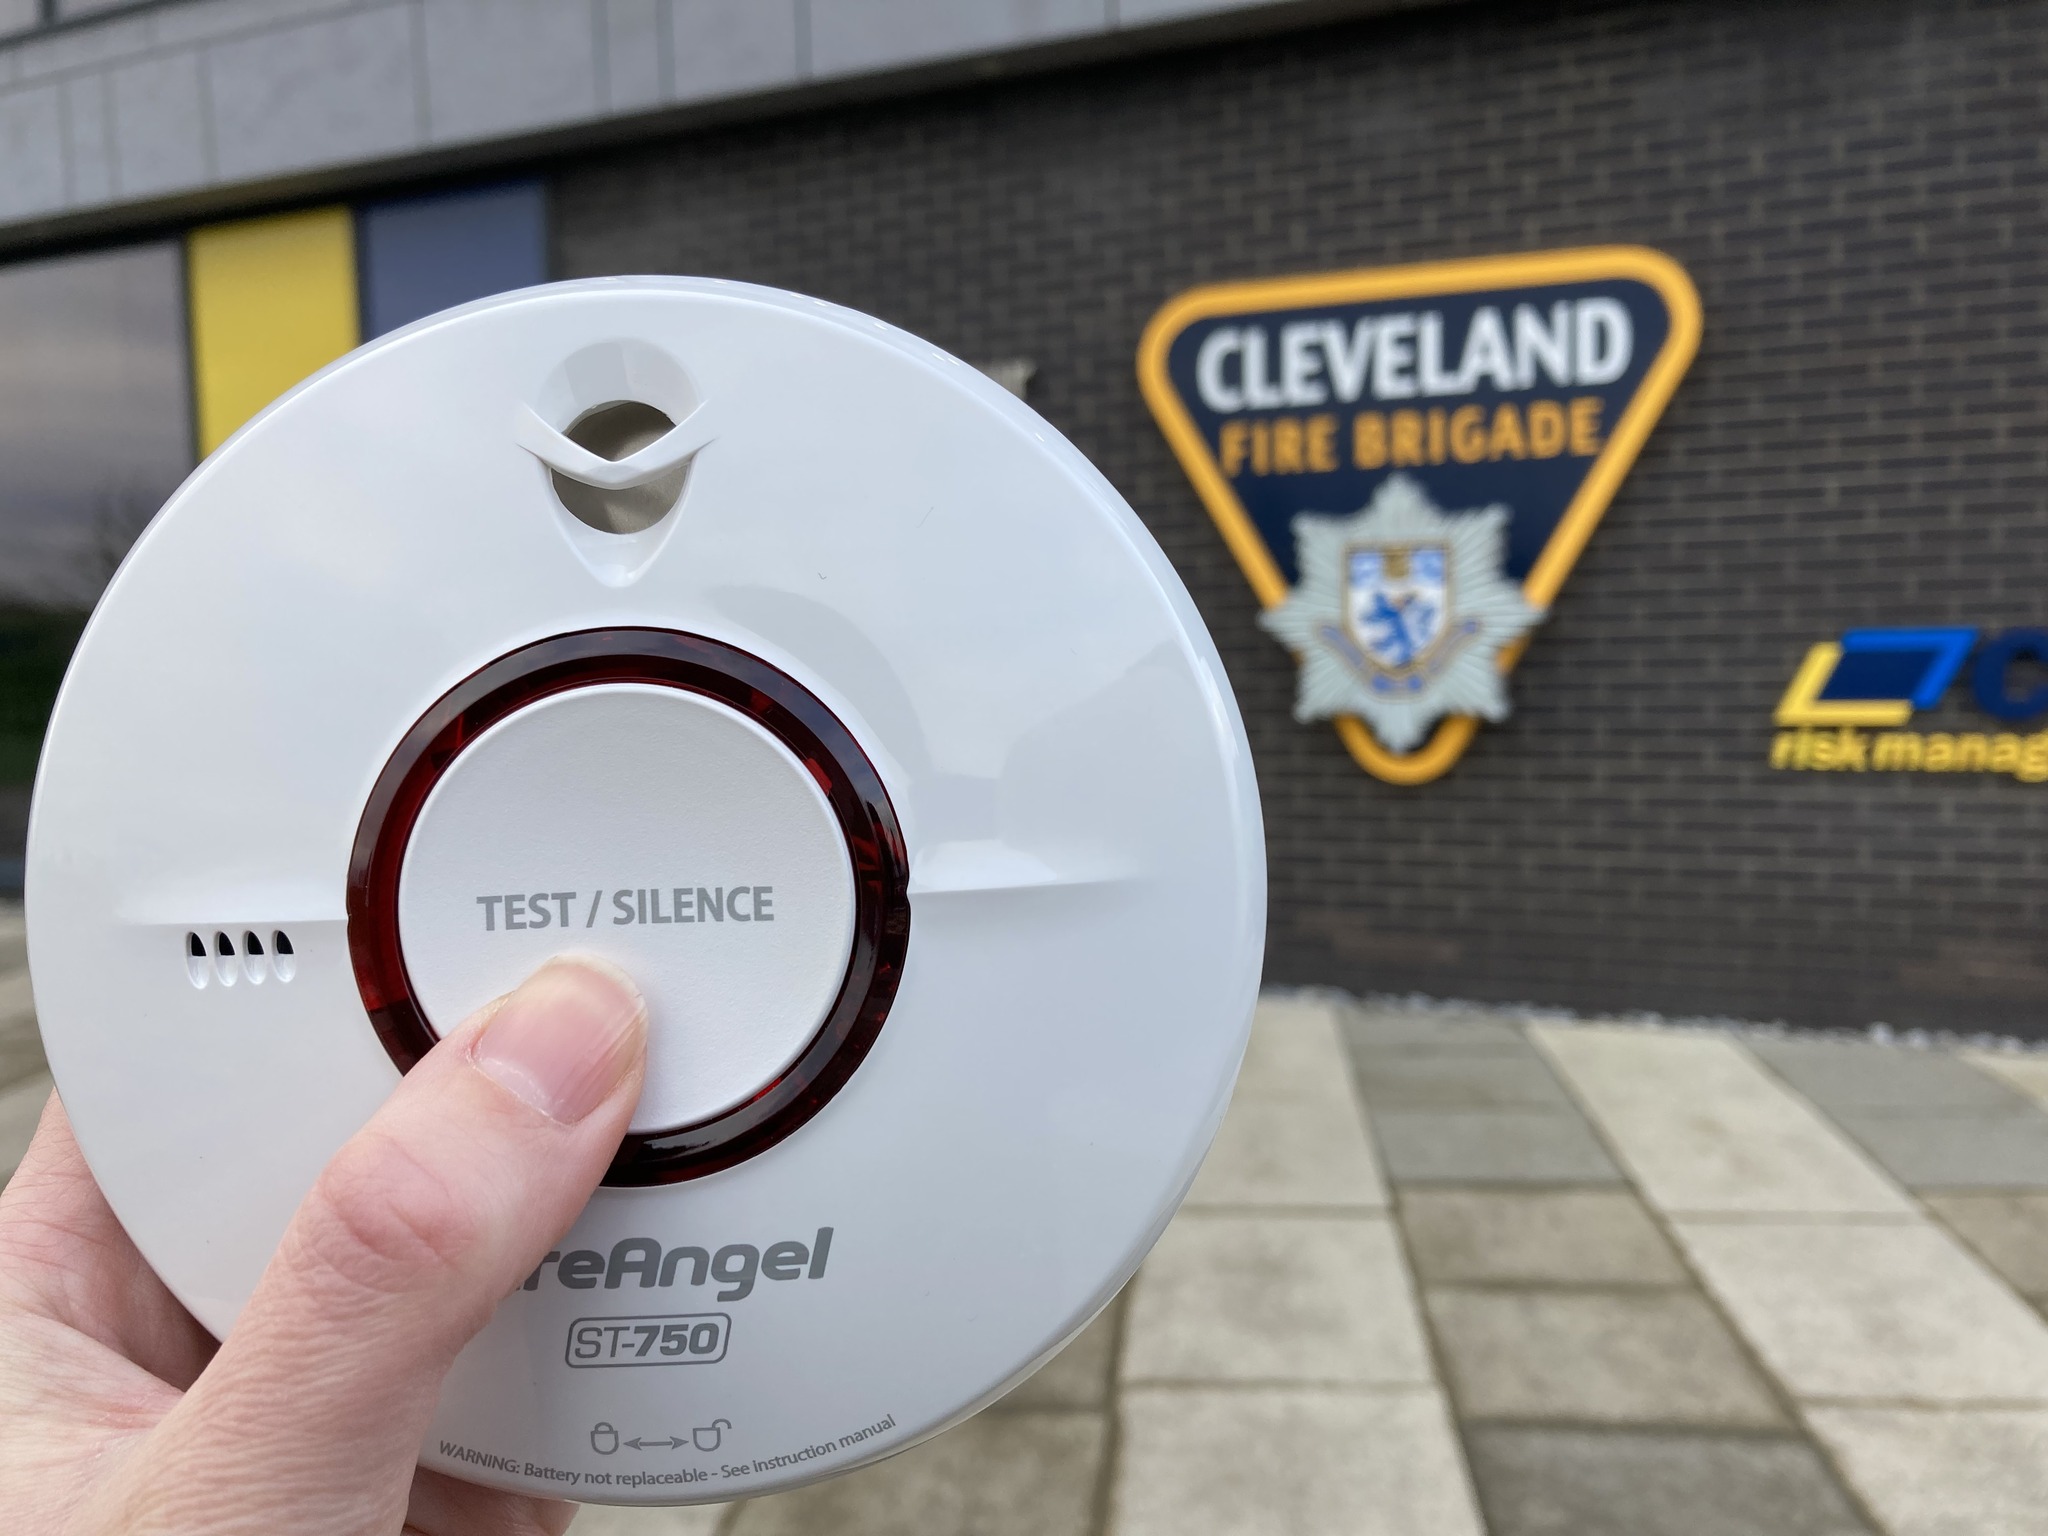 FireAngel smoke alarm with the test it button pressed outside of headquarters